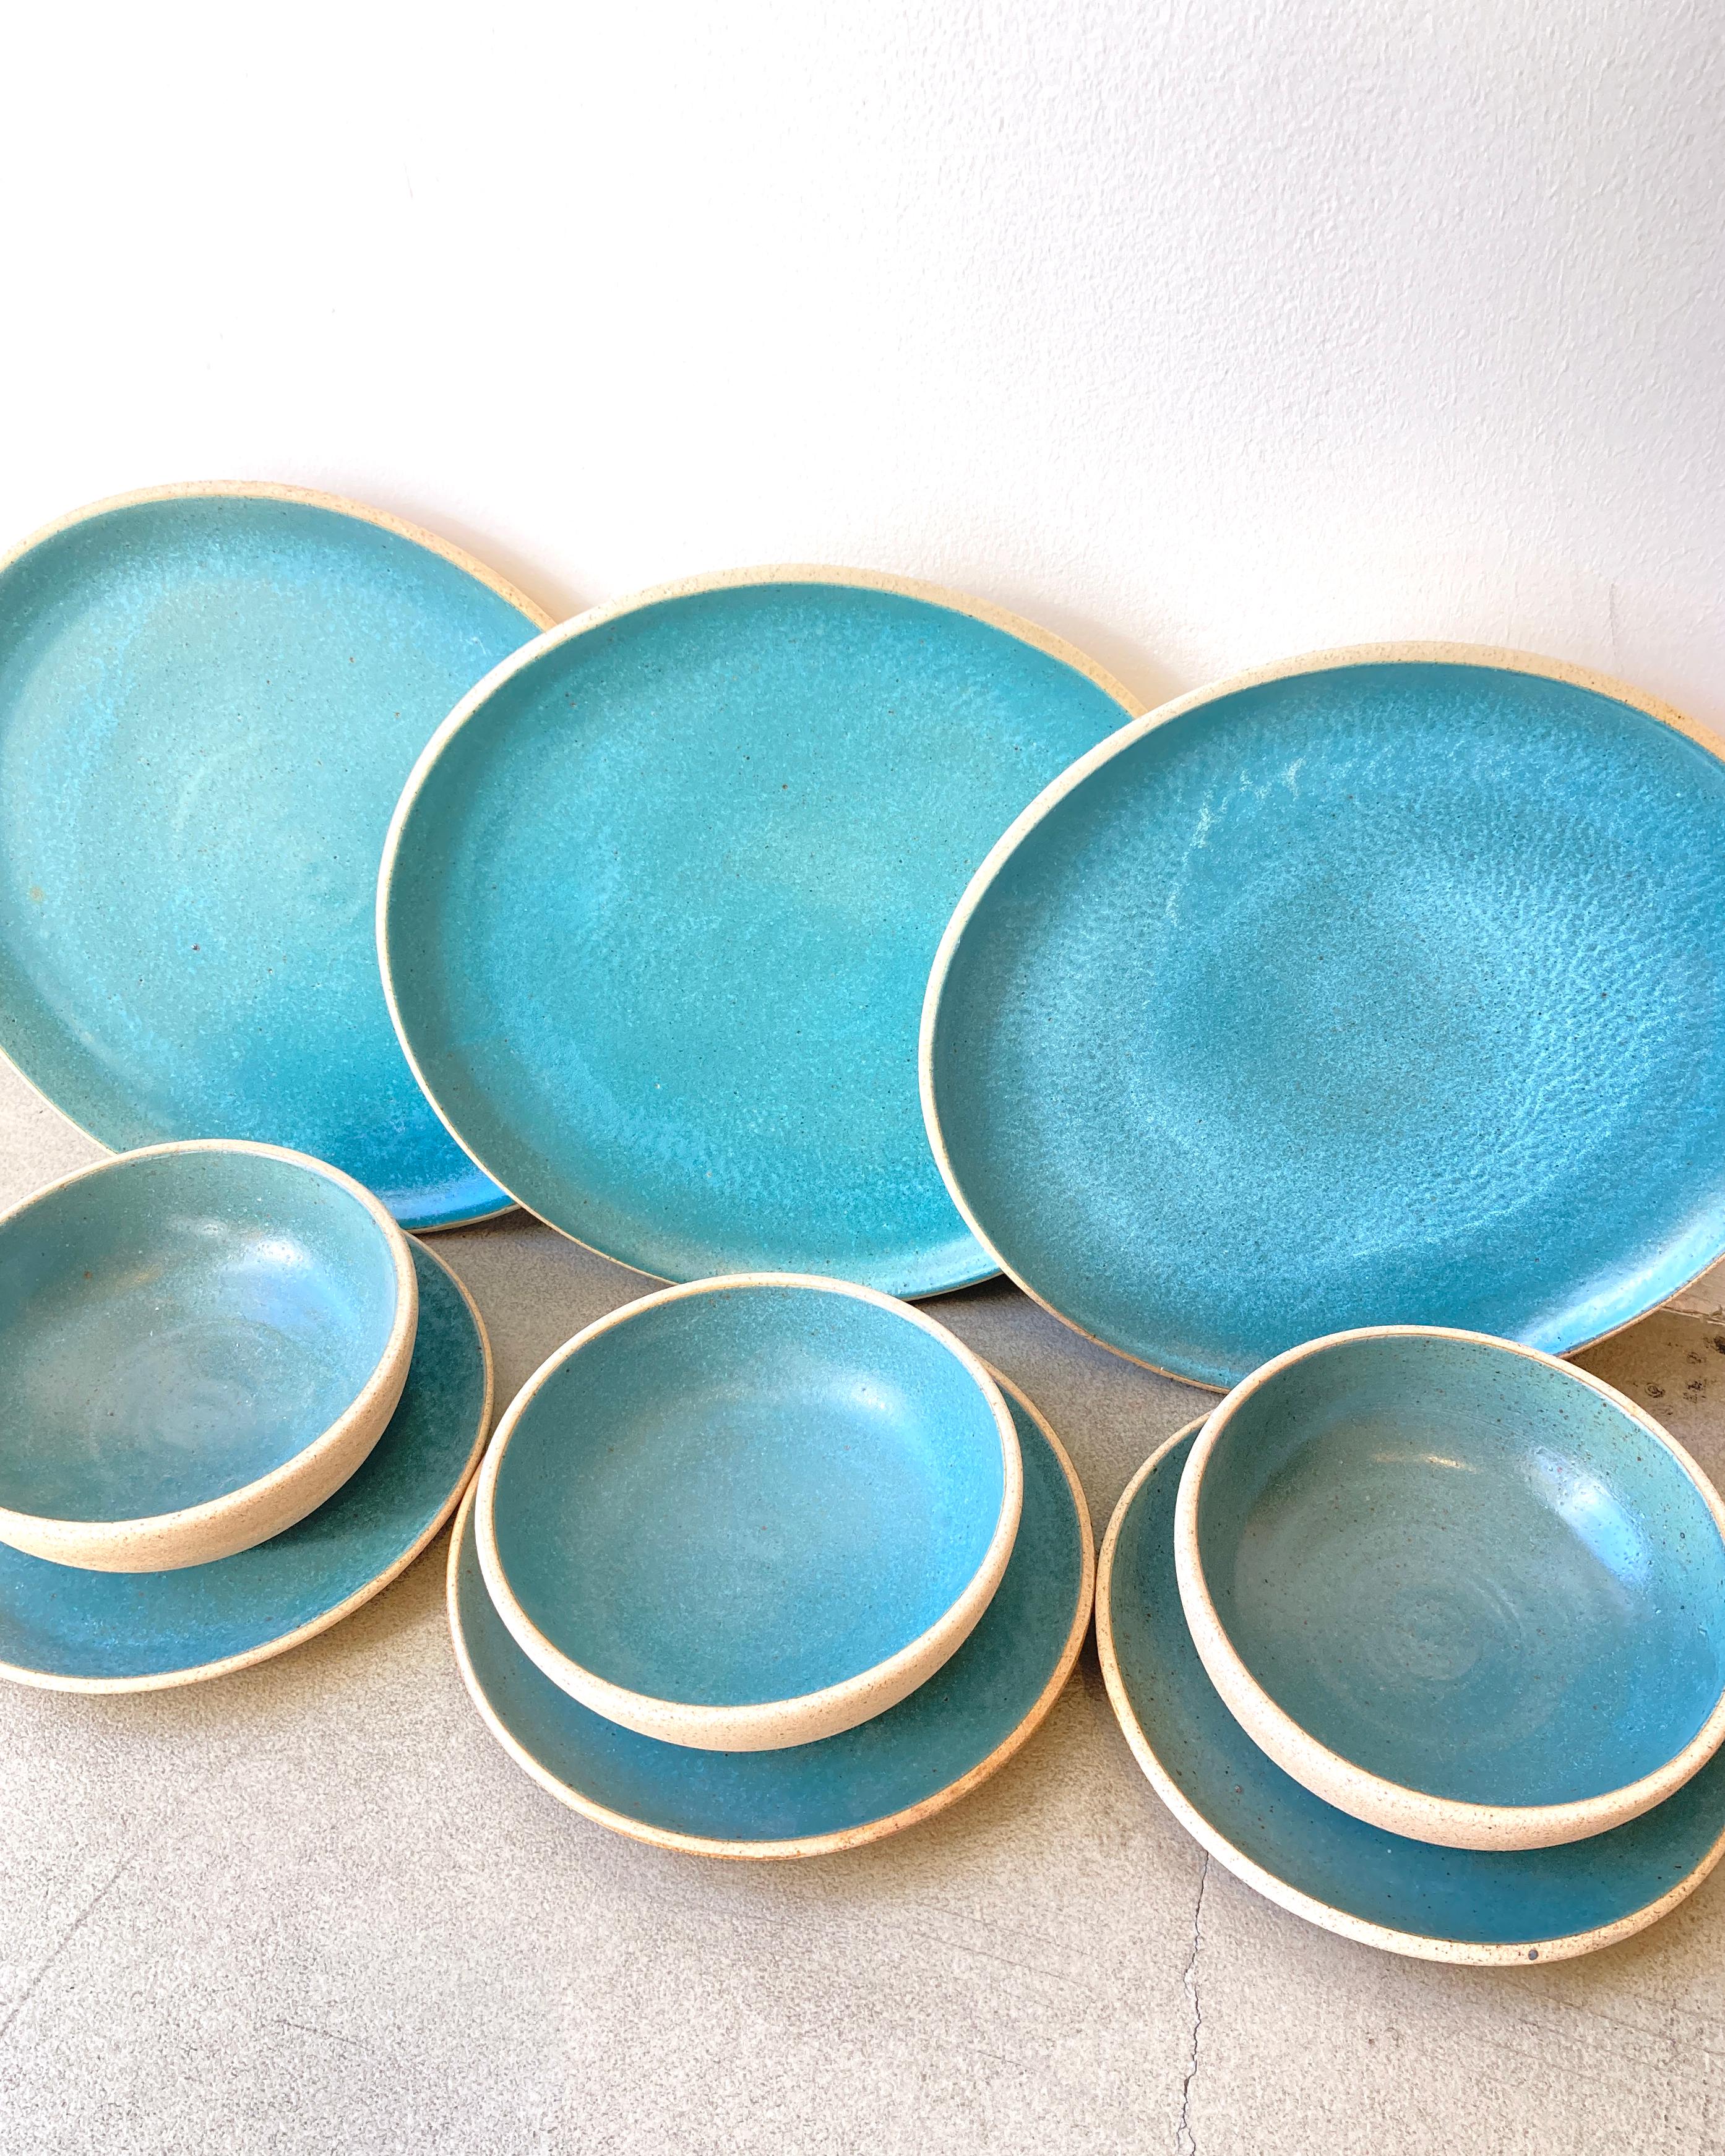 Mexican Handmade Ceramic Stoneware Bowl in Turquoise, in Stock